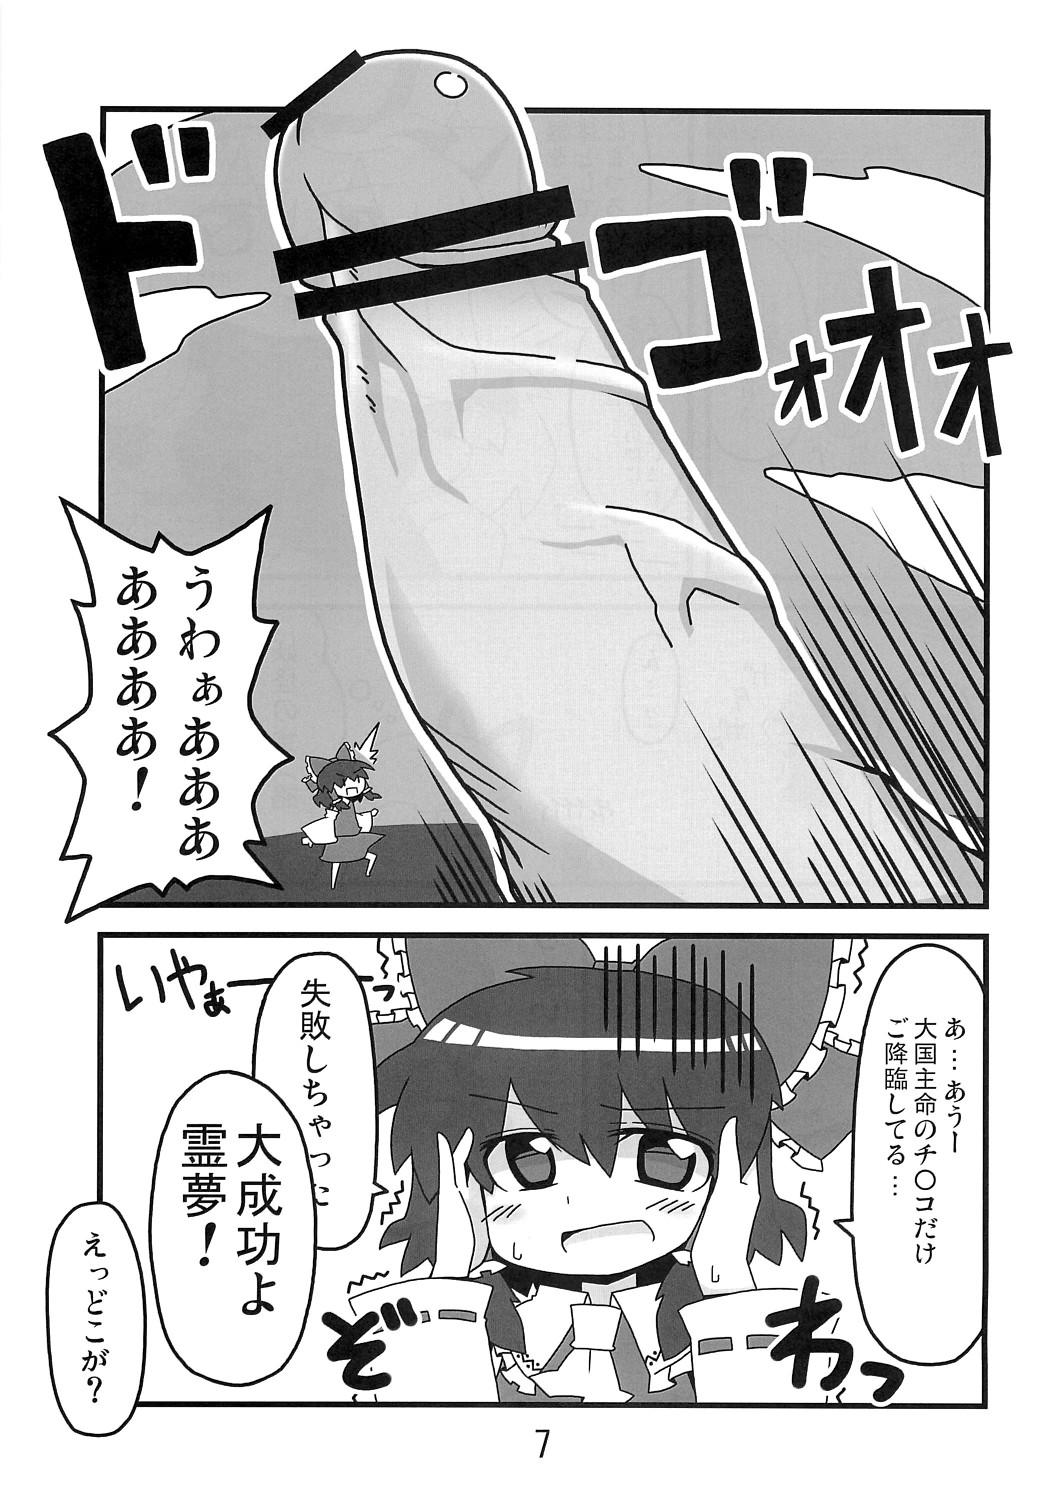 Girl 東方豊年祭 - Touhou project Blackwoman - Page 6